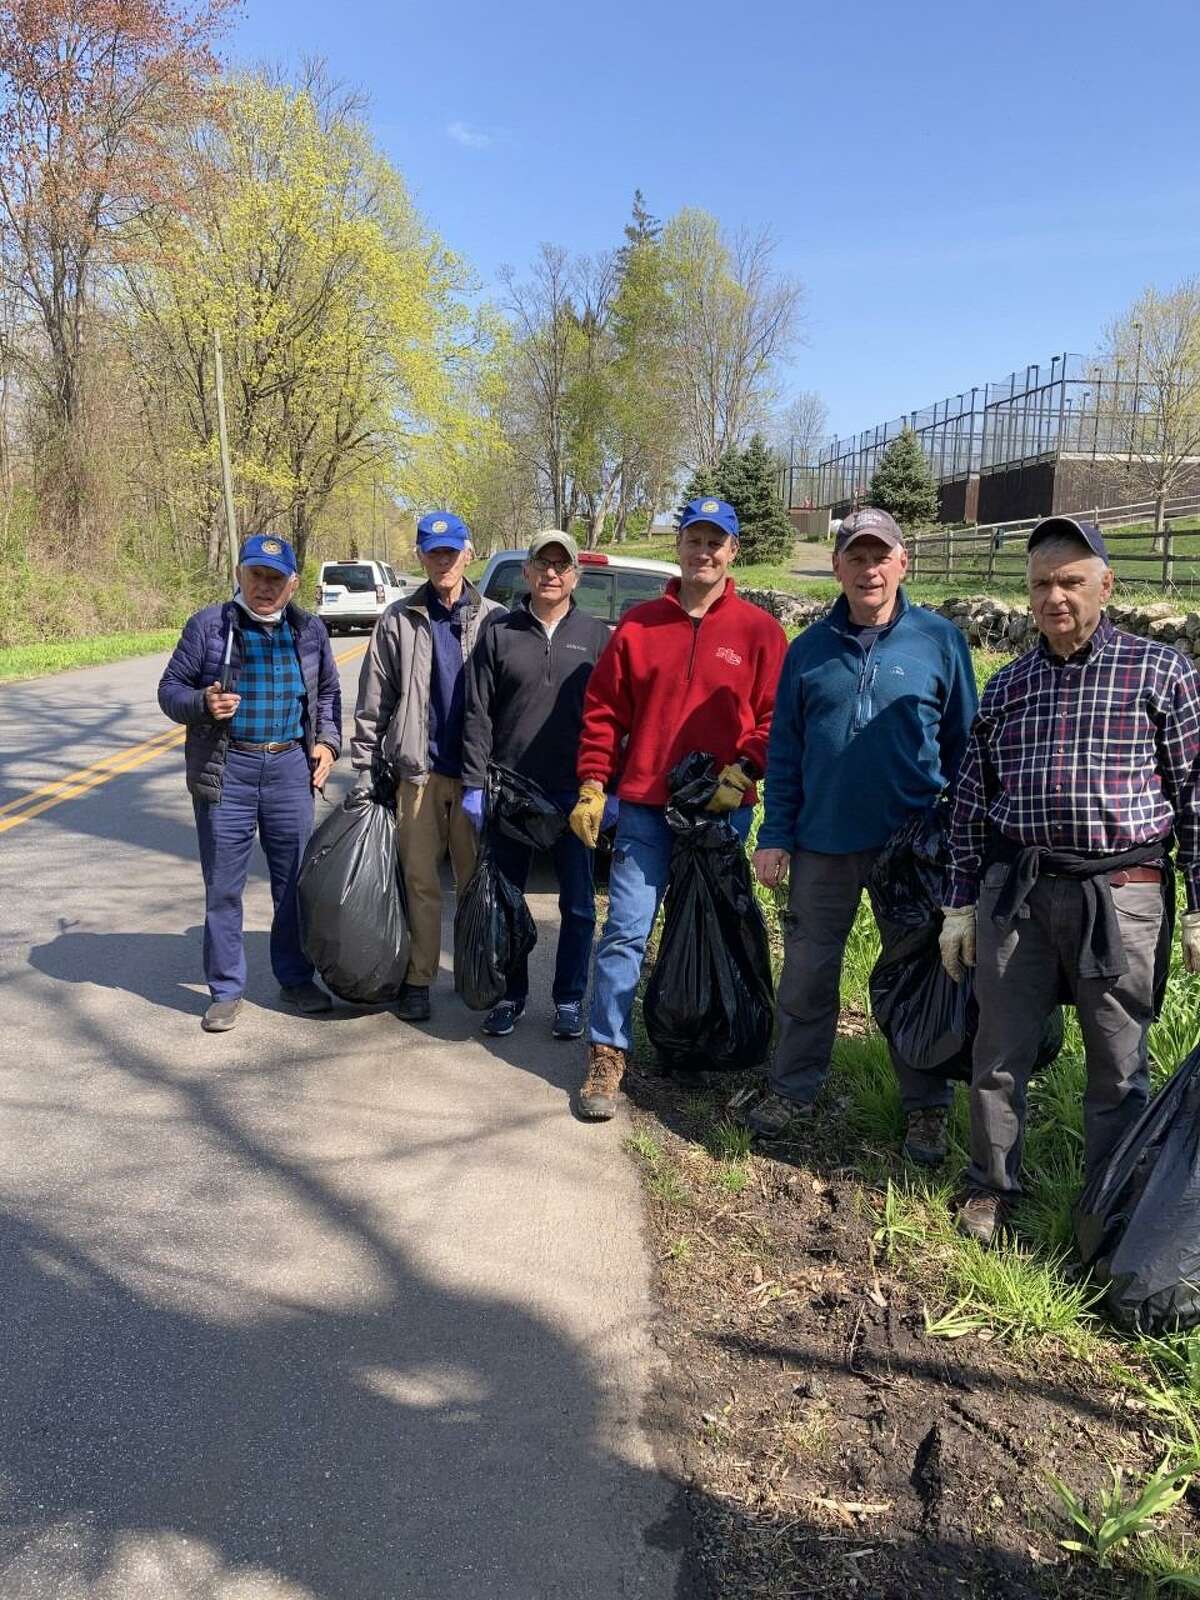 Members of the New Canaan Exchange Club, and families worked to pick up and dispose of trash on Lapham Road on the west side of Waveny Park this past Saturday, April 24. A pickup truck full of refuse was removed from the roadside. Exchange Club members in this photo are: Gene Milosh, Bob Williams, Charles Taben, Steve Root, Mike Mimnaugh and Mike Gregorio. Luke Tashjian organized this year’s, 2021, effort, and provided coffee, and donuts for the team.